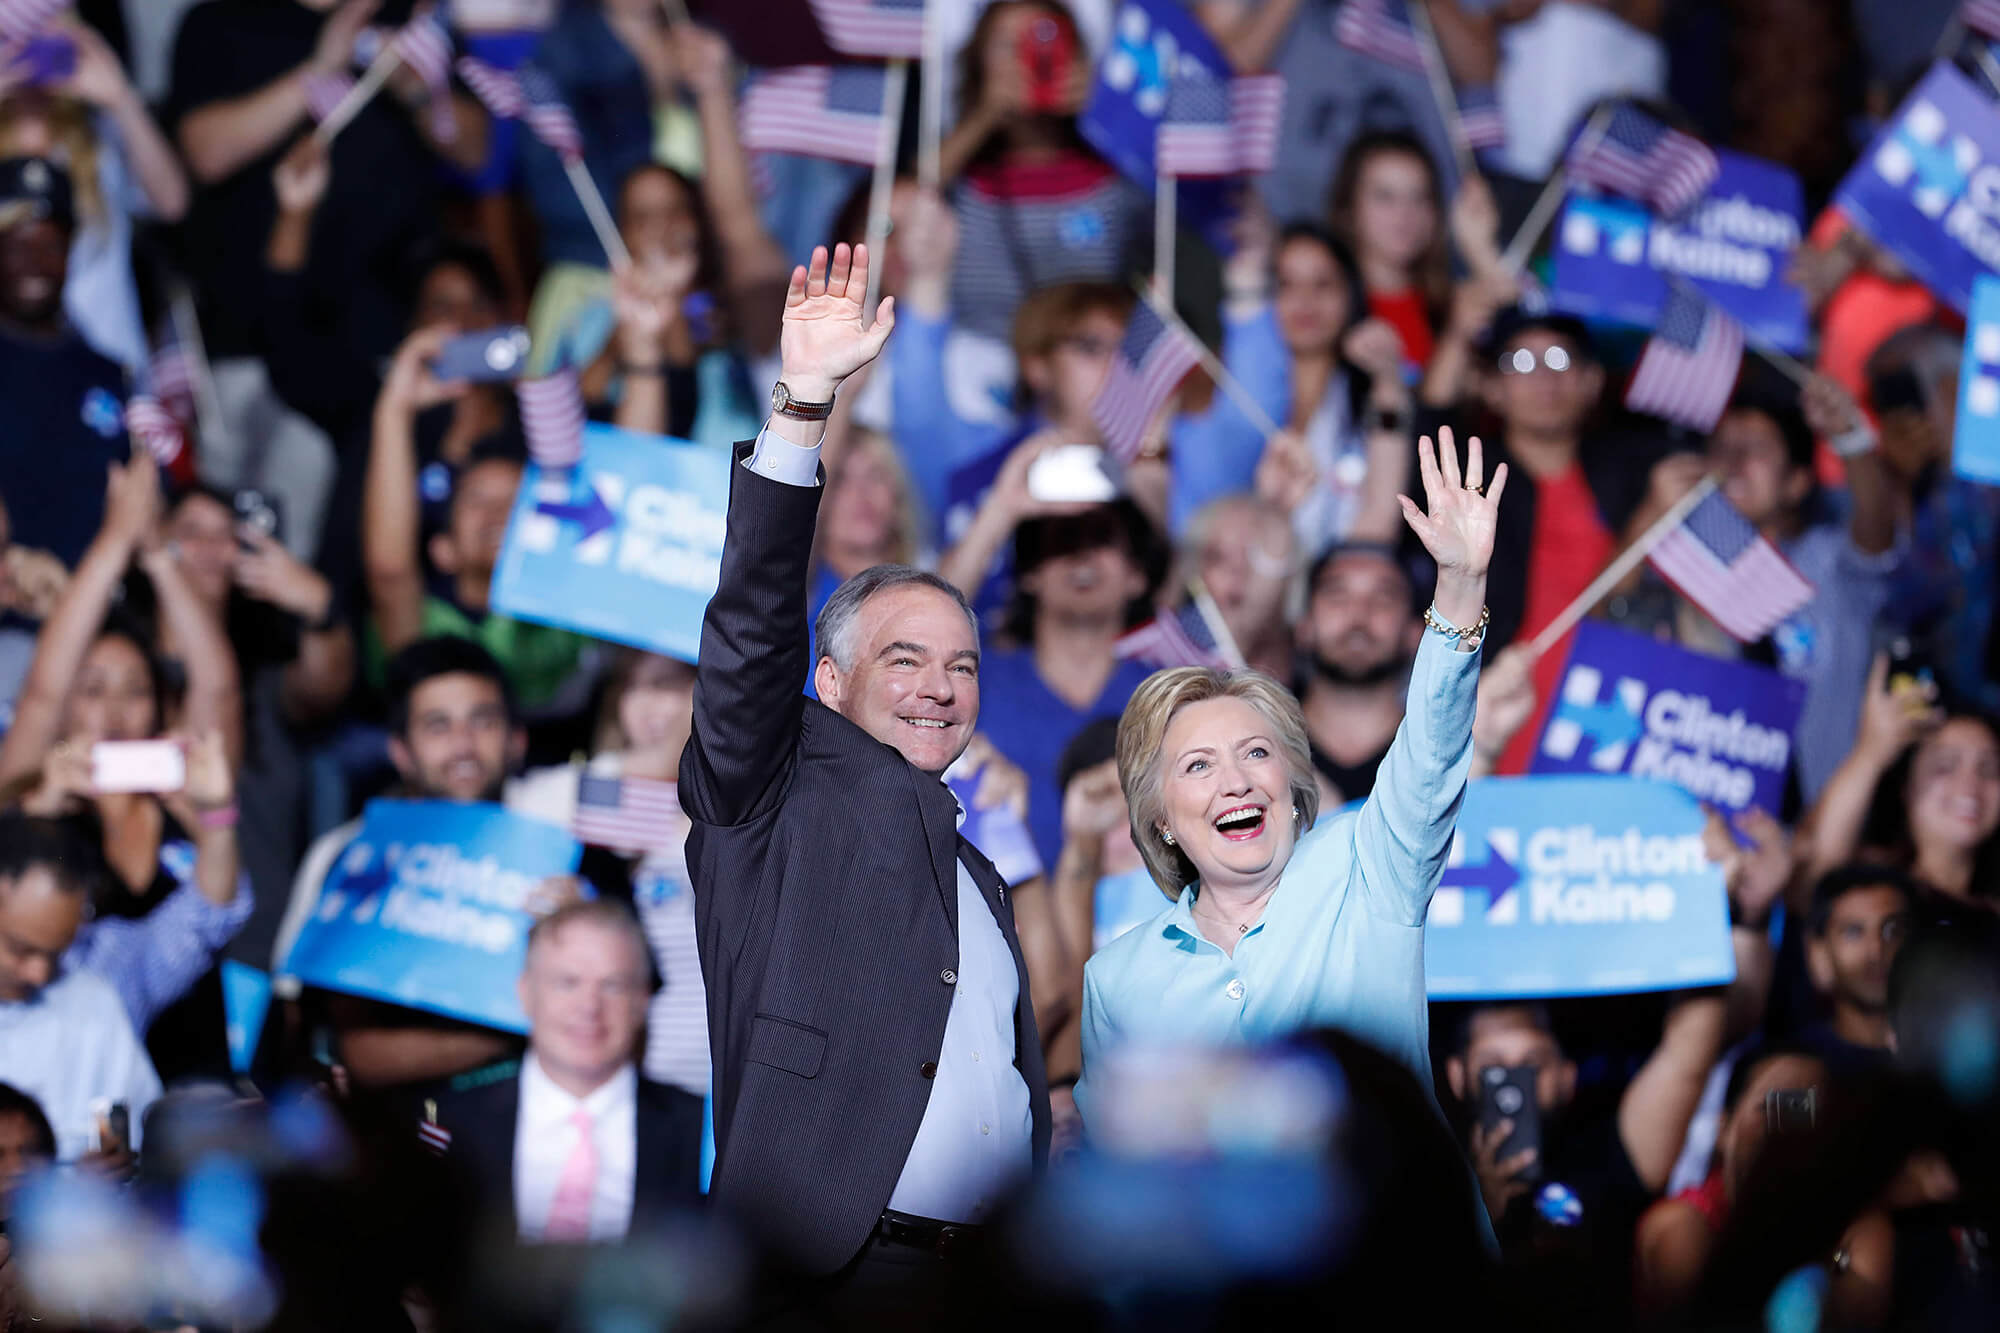 Image of Hillary Clinton and Tim Kaine together